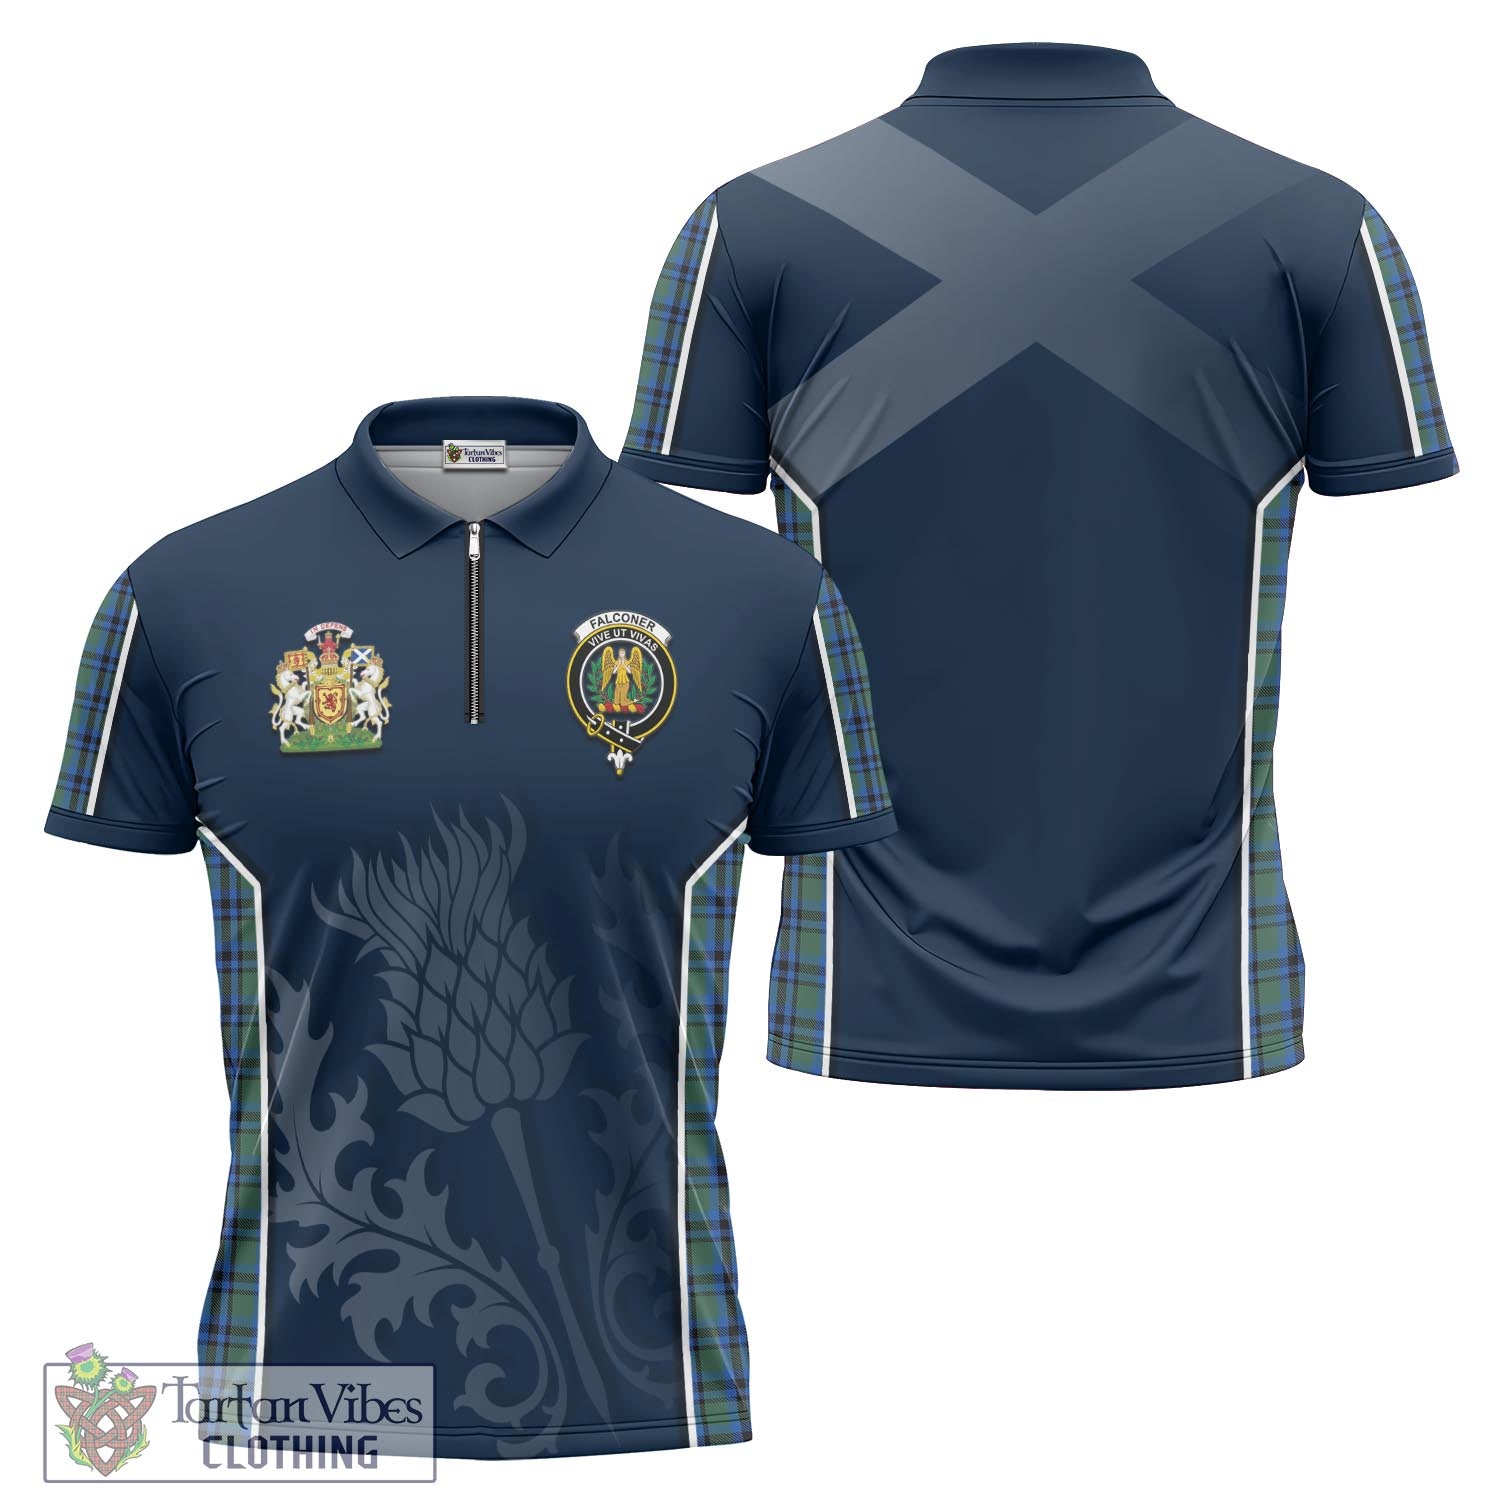 Tartan Vibes Clothing Falconer Tartan Zipper Polo Shirt with Family Crest and Scottish Thistle Vibes Sport Style